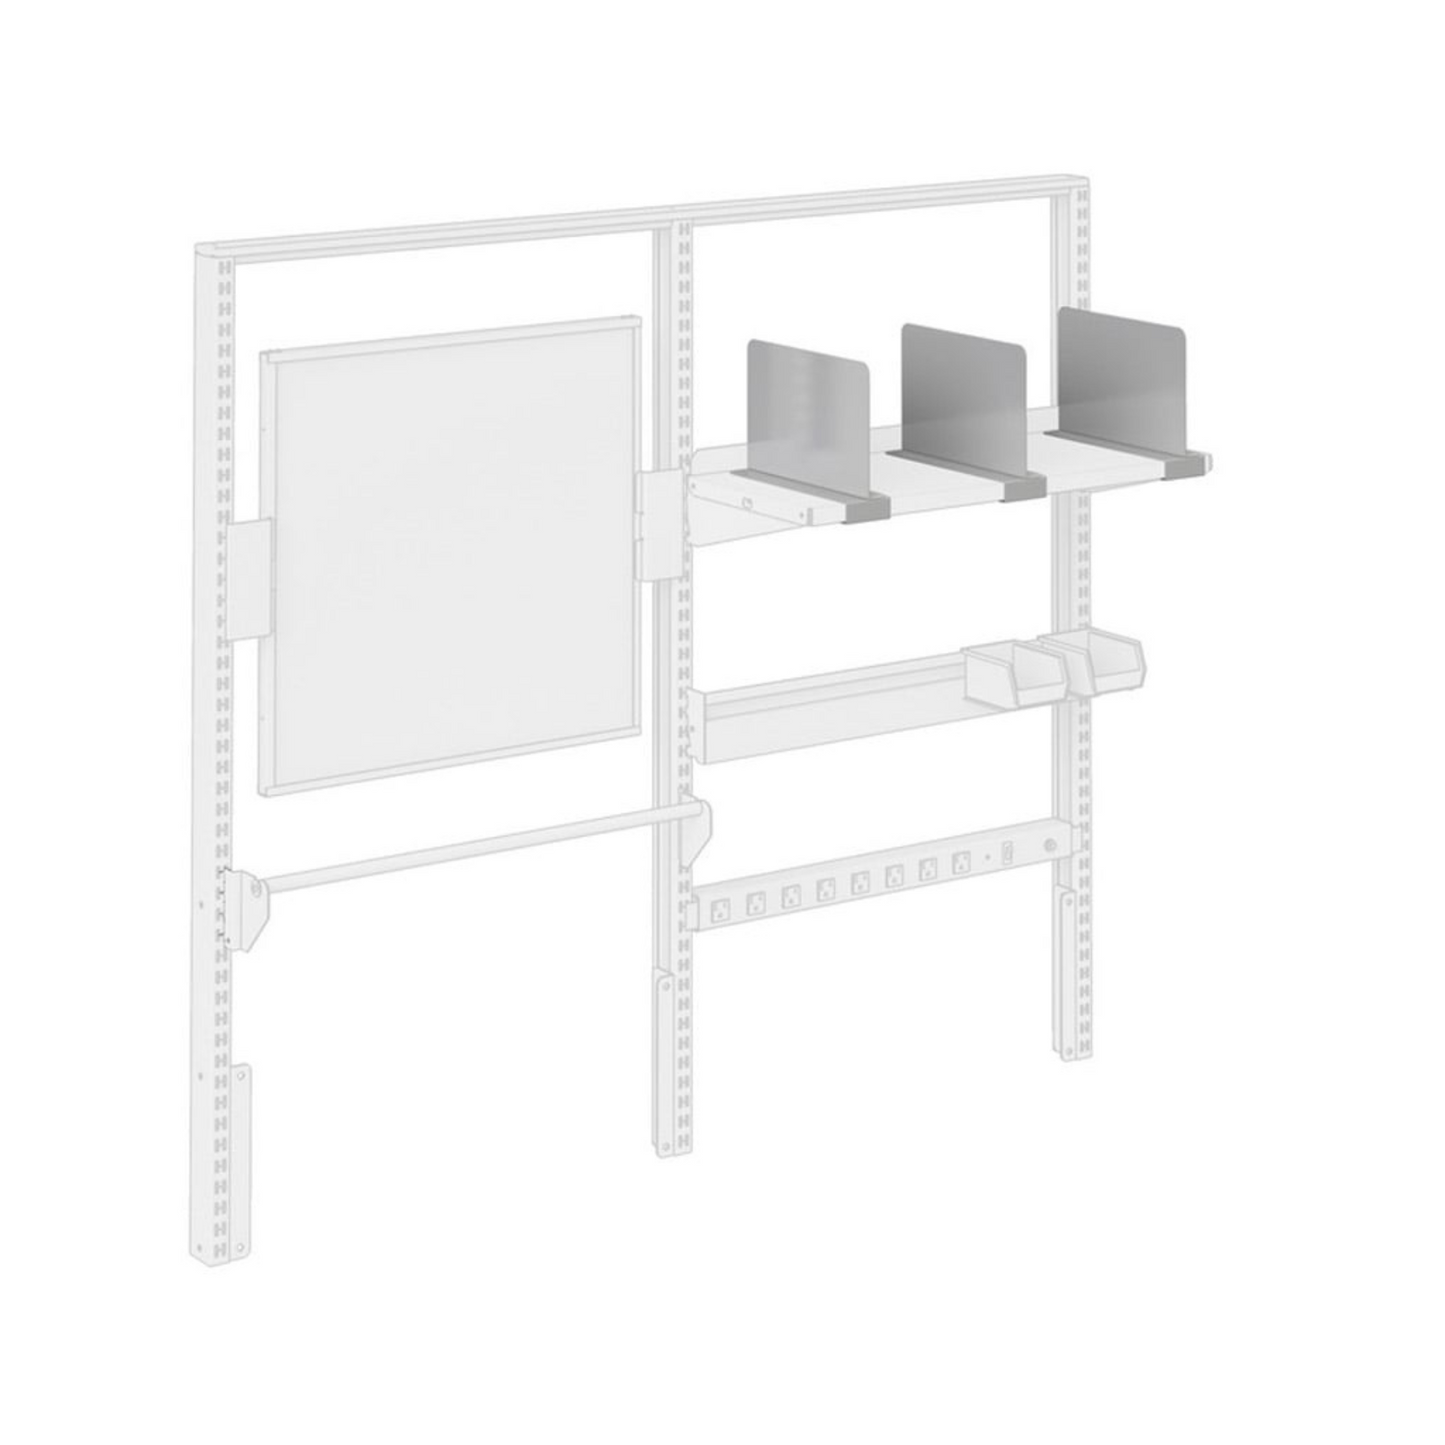 Heavy-Duty Packing Workstation - Manual Adjustment, 60"W x 30"D Top